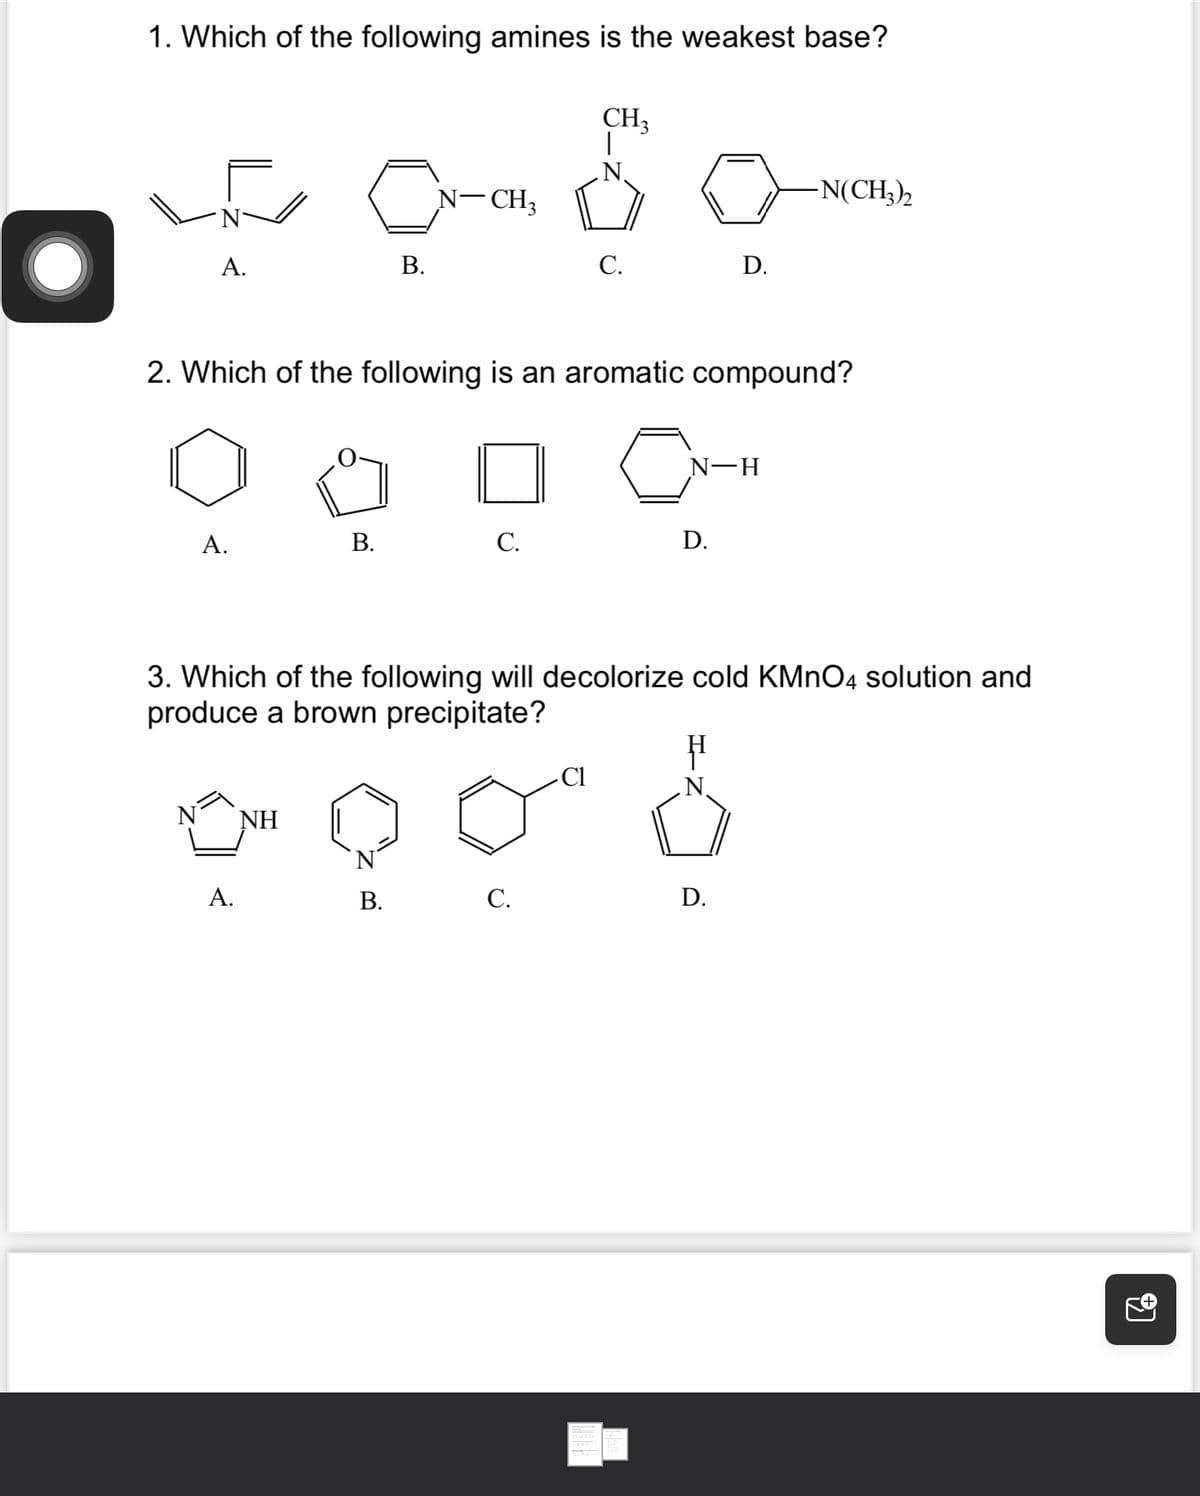 O
1. Which of the following amines is the weakest base?
A.
N
A.
c
B.
A.
NH
2. Which of the following is an aromatic compound?
CN-
B.
N-CH3
B.
C.
CH3
|
C.
C.
3. Which of the following will decolorize cold KMnO4 solution and
produce a brown precipitate?
Cl
D.
N-H
D.
-N(CH3)2
D.
14